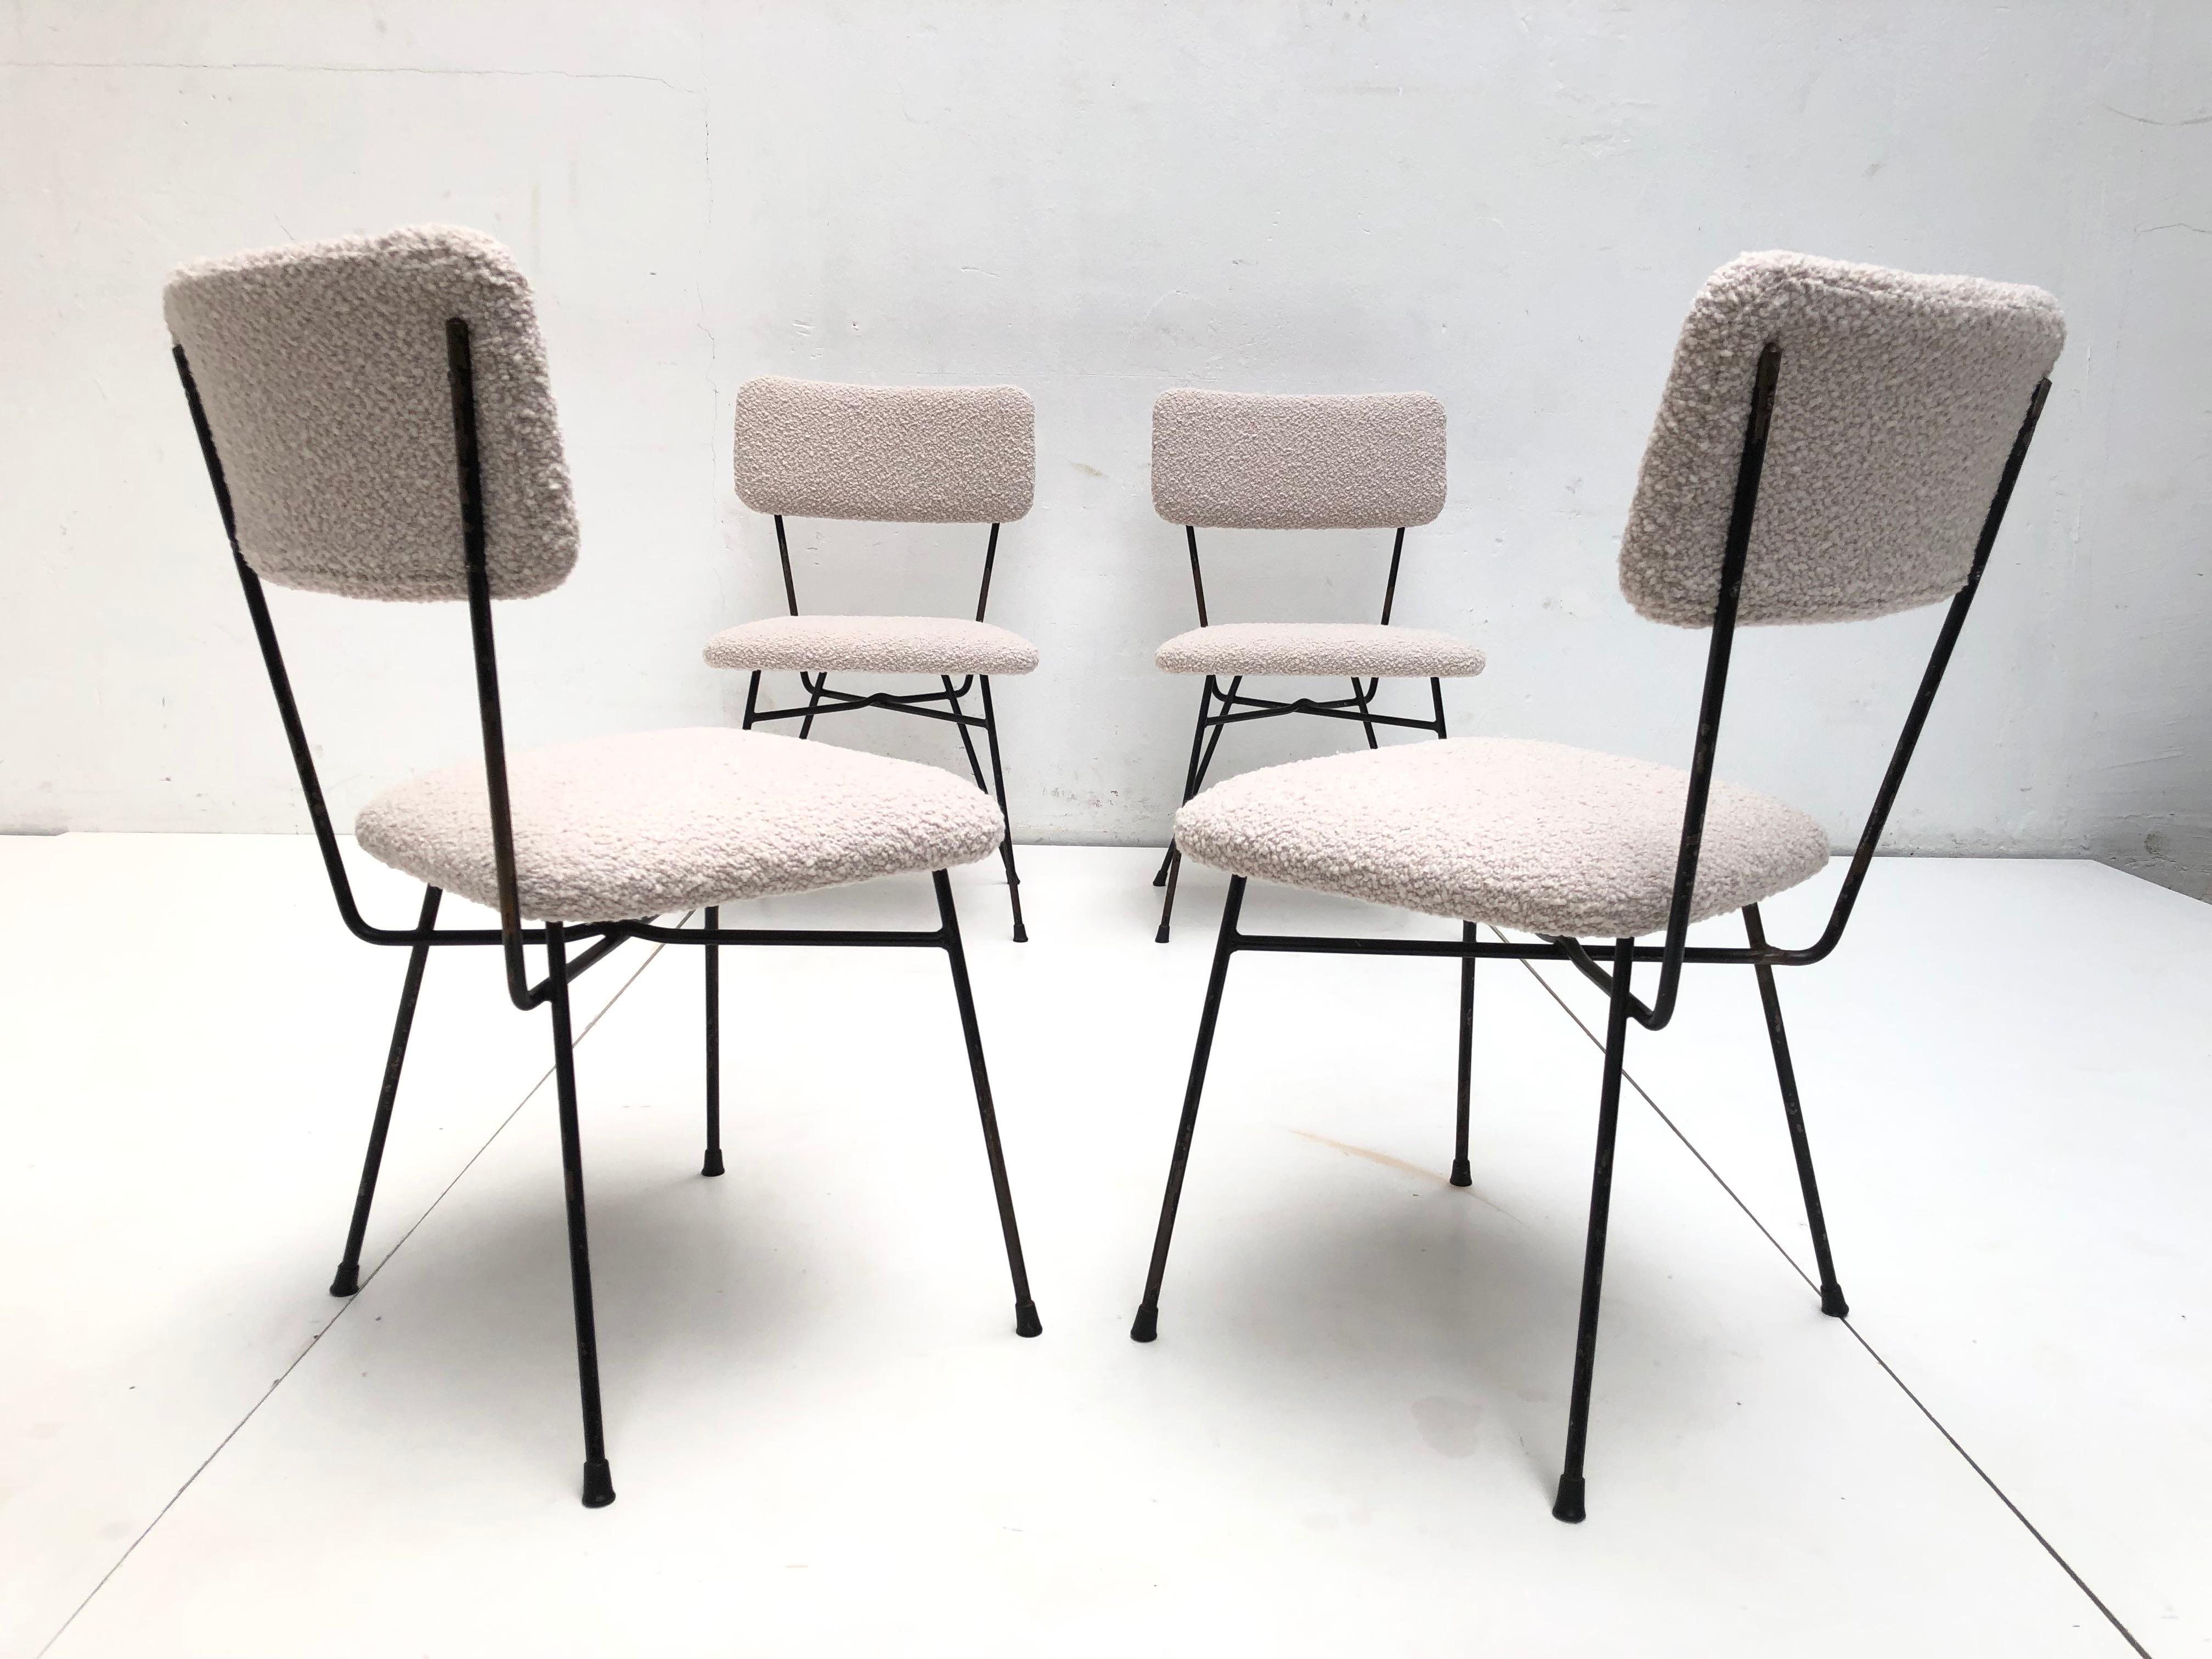 Mid-Century Modern 4 Dining Chairs by Pizzetti Rome Italy 1950s, New Wool Boucle Upholstery For Sale